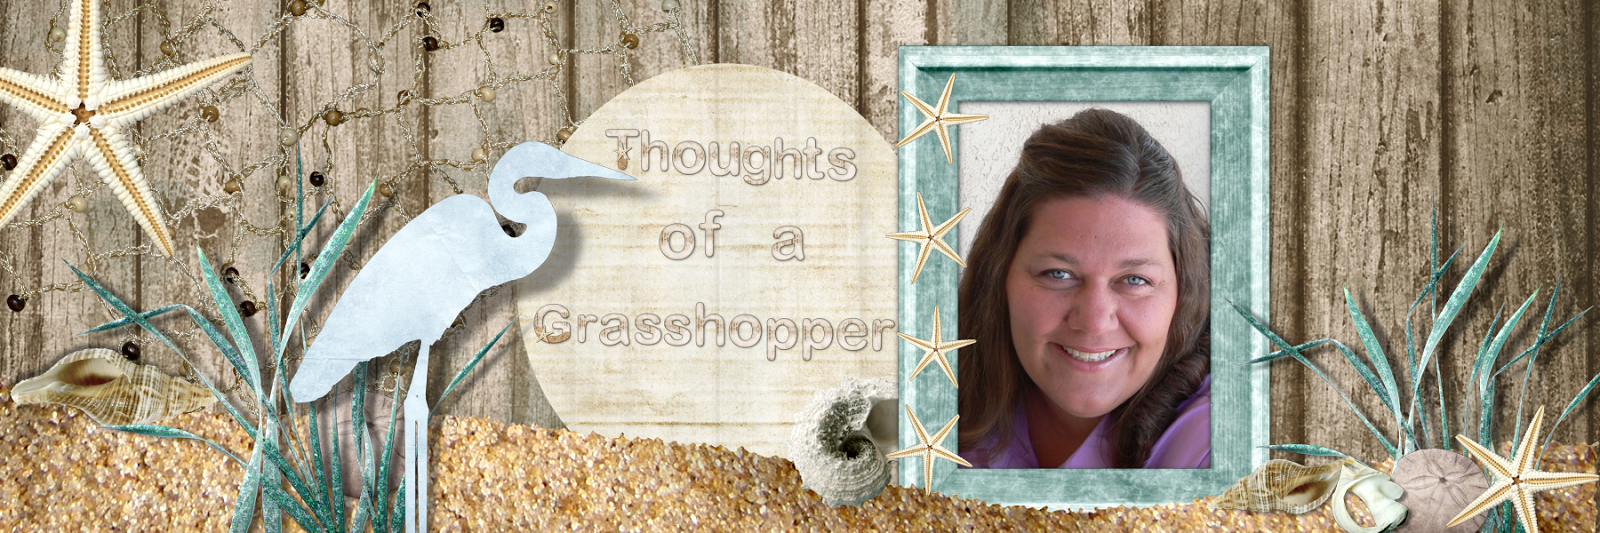 Thoughts of a Grasshopper